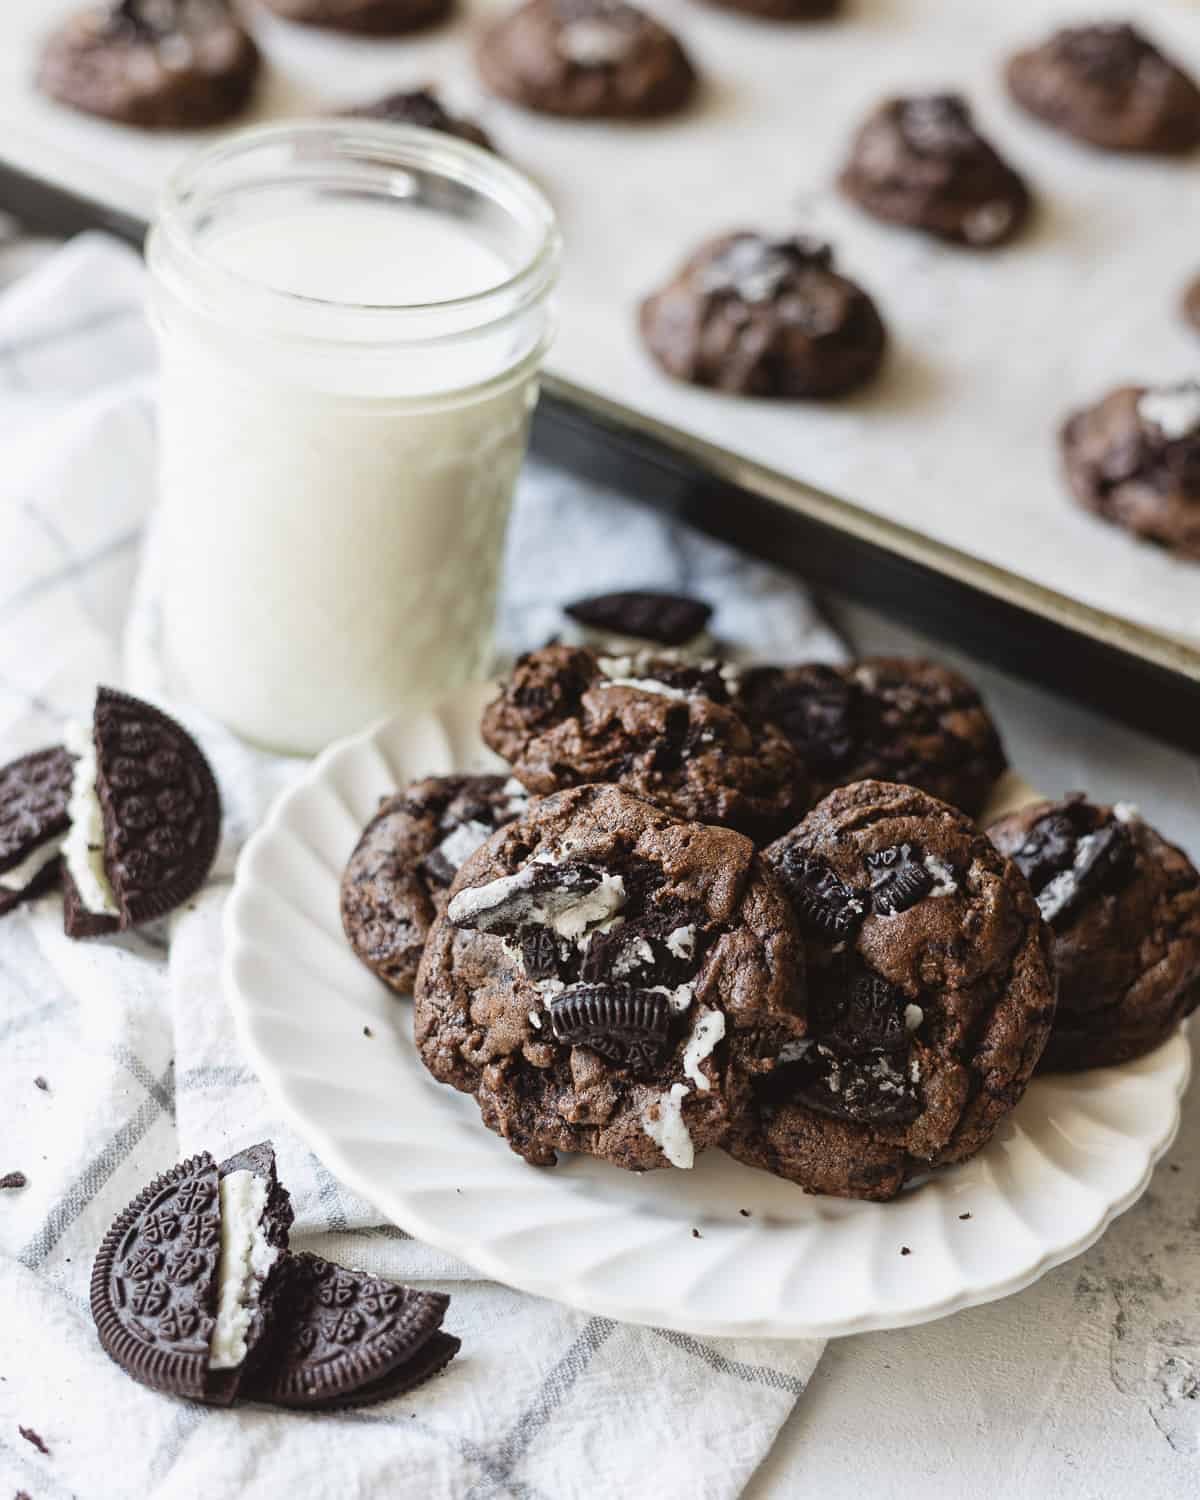 A plate of chocolate cookies, a glass of milk, and broken chocolate sandwich cookies.